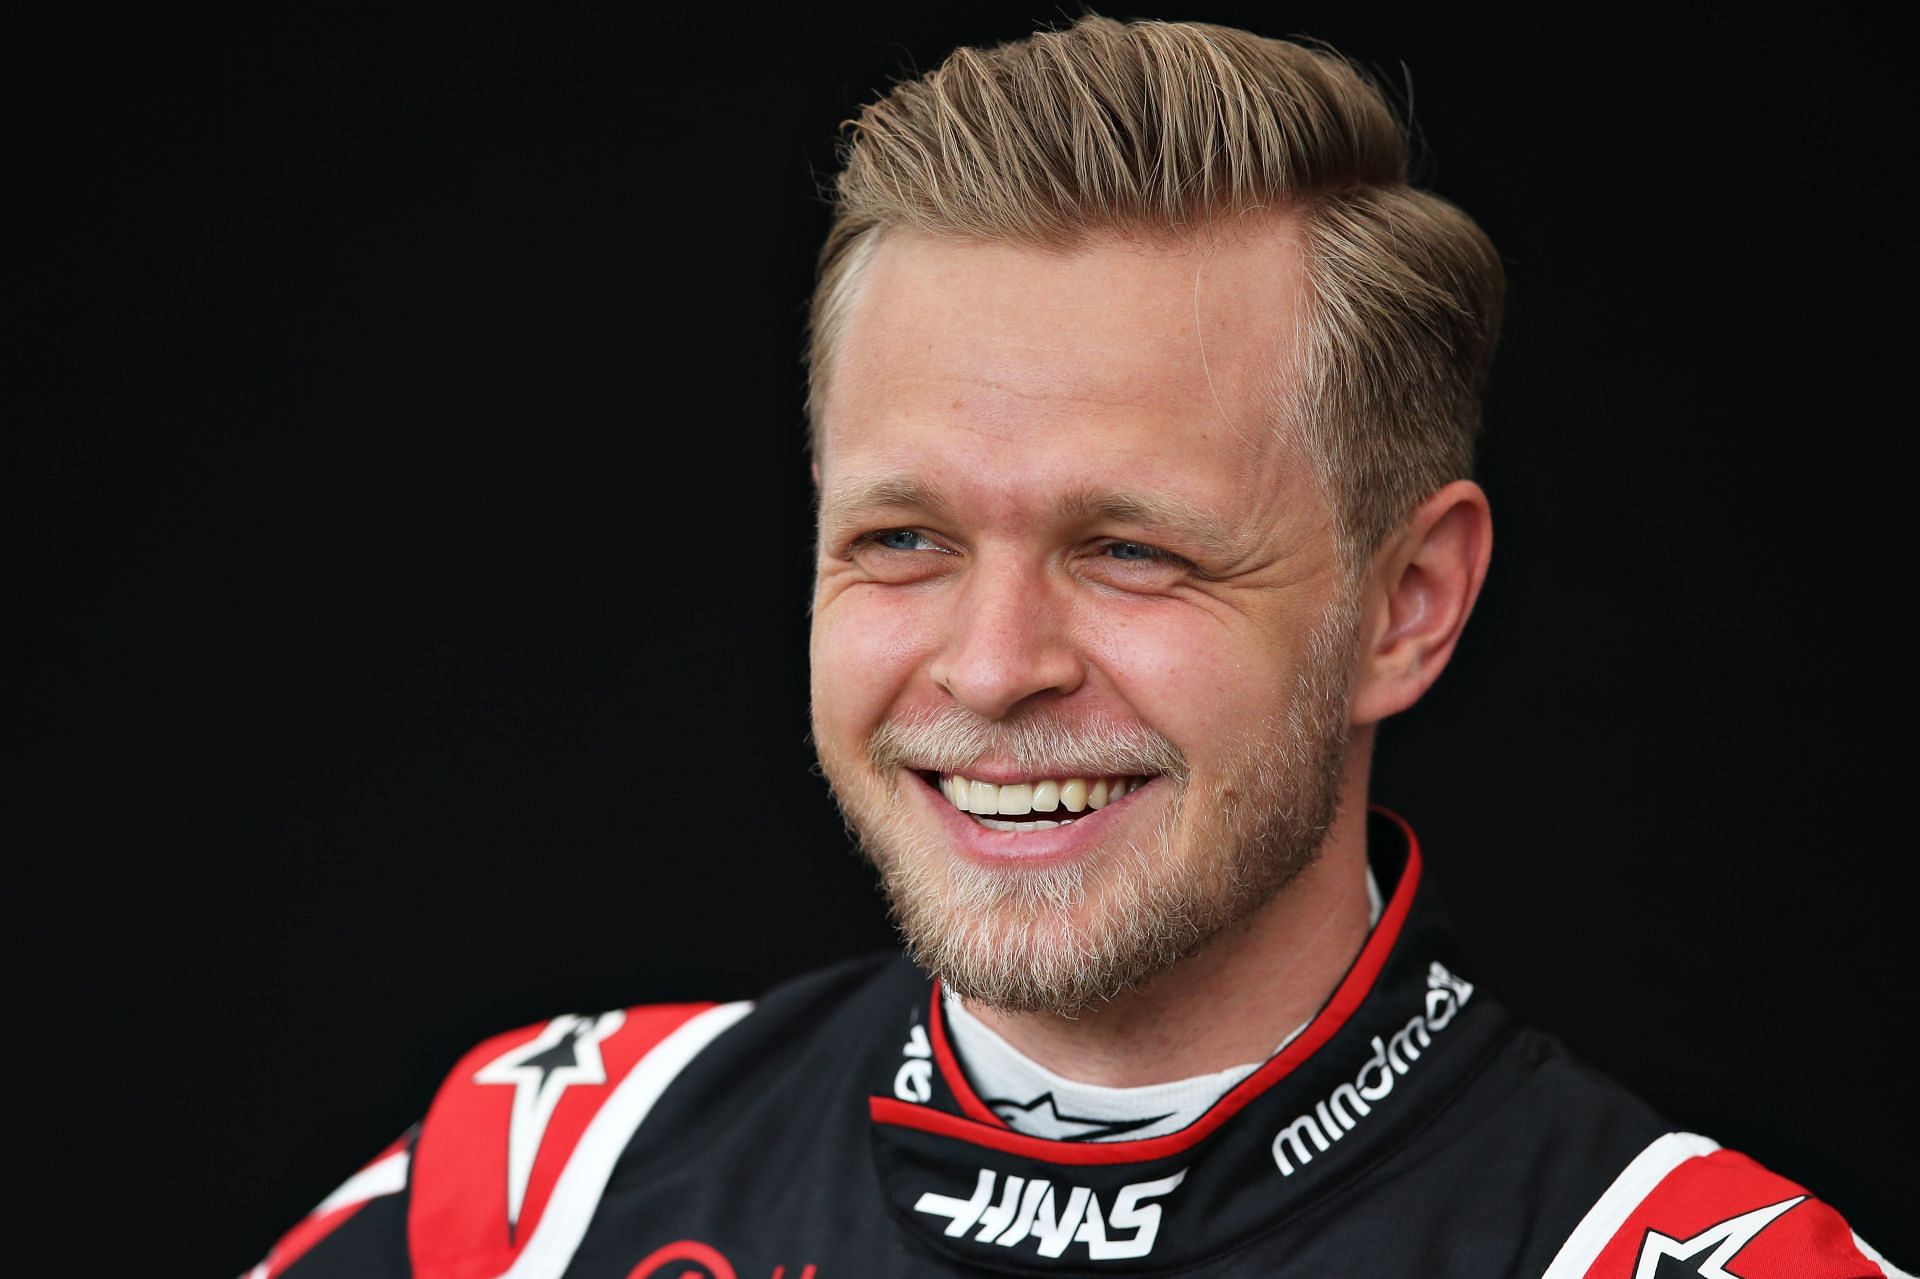 Kevin Magnussen makes a return to F1 with Haas